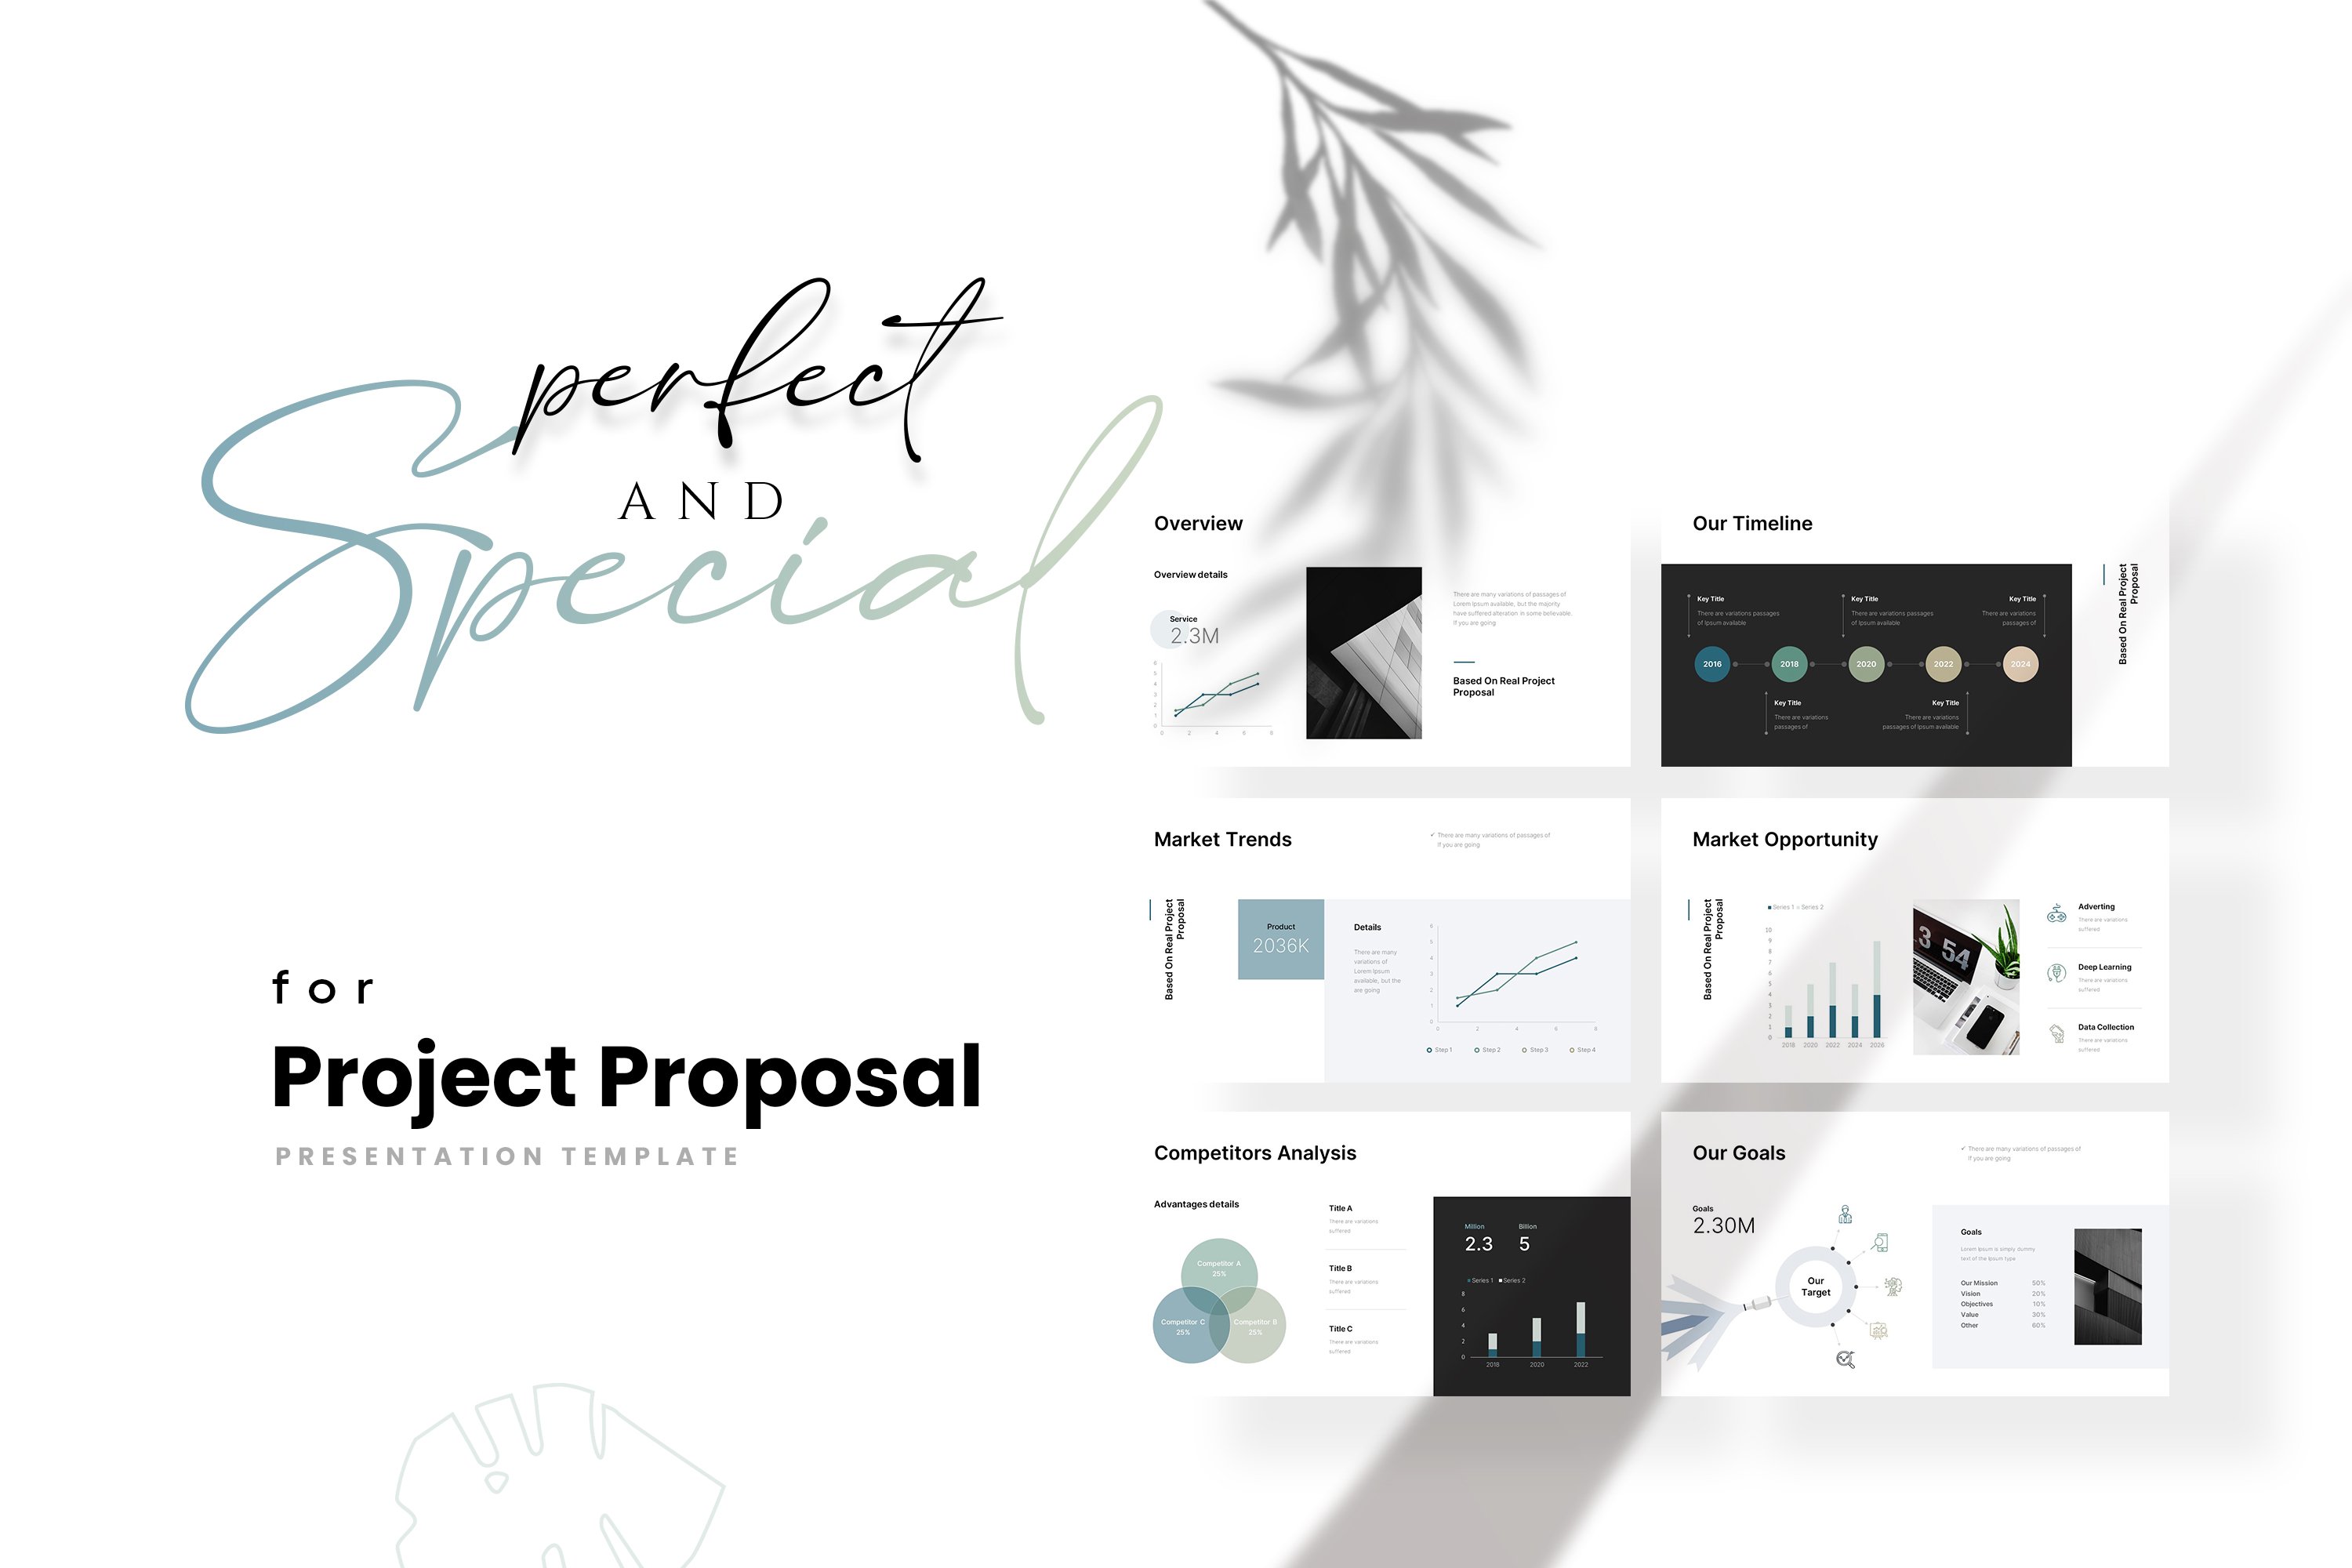 2 project proposal canva powerpoint presentation template 863